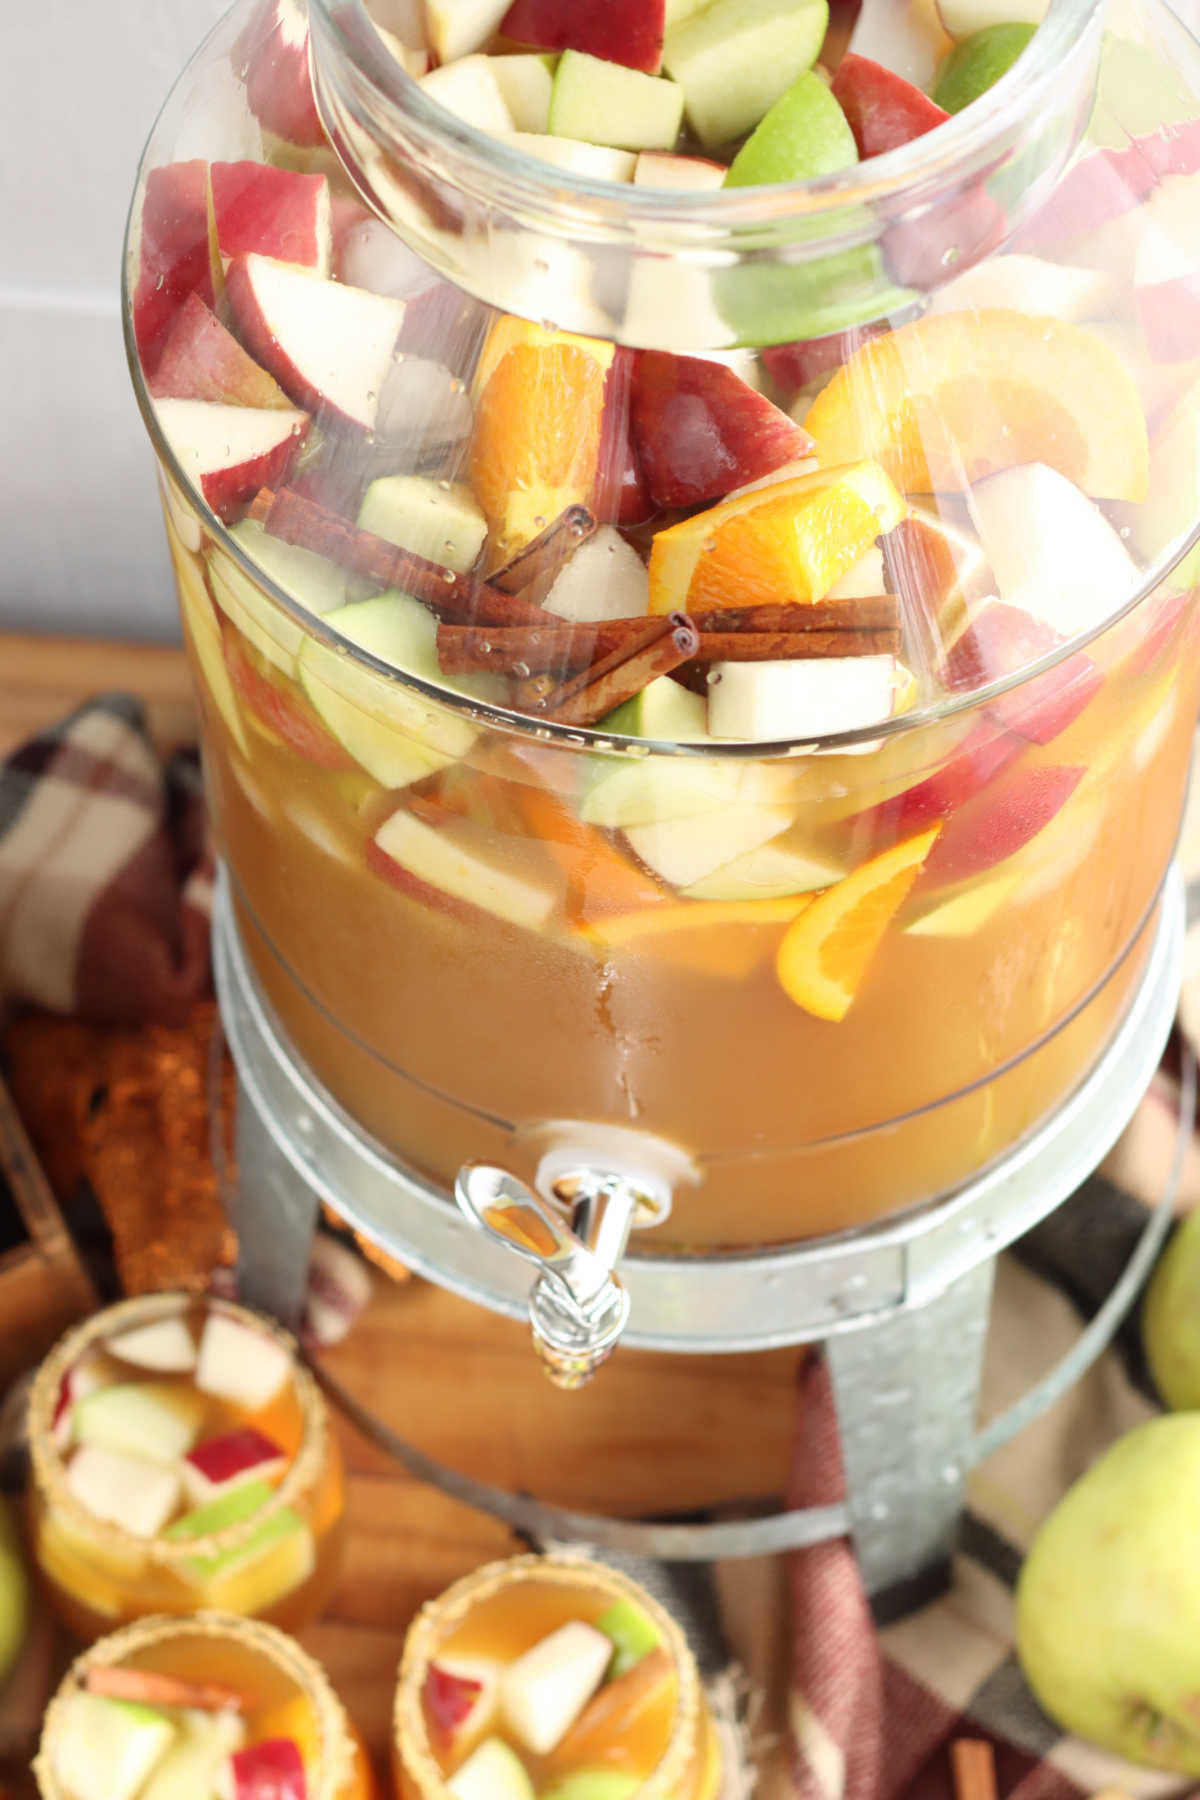 Clear drink dispenser with apple sangria, chunks of red, green apples, oranges, cinnamon sticks, stemless wine glasses below.